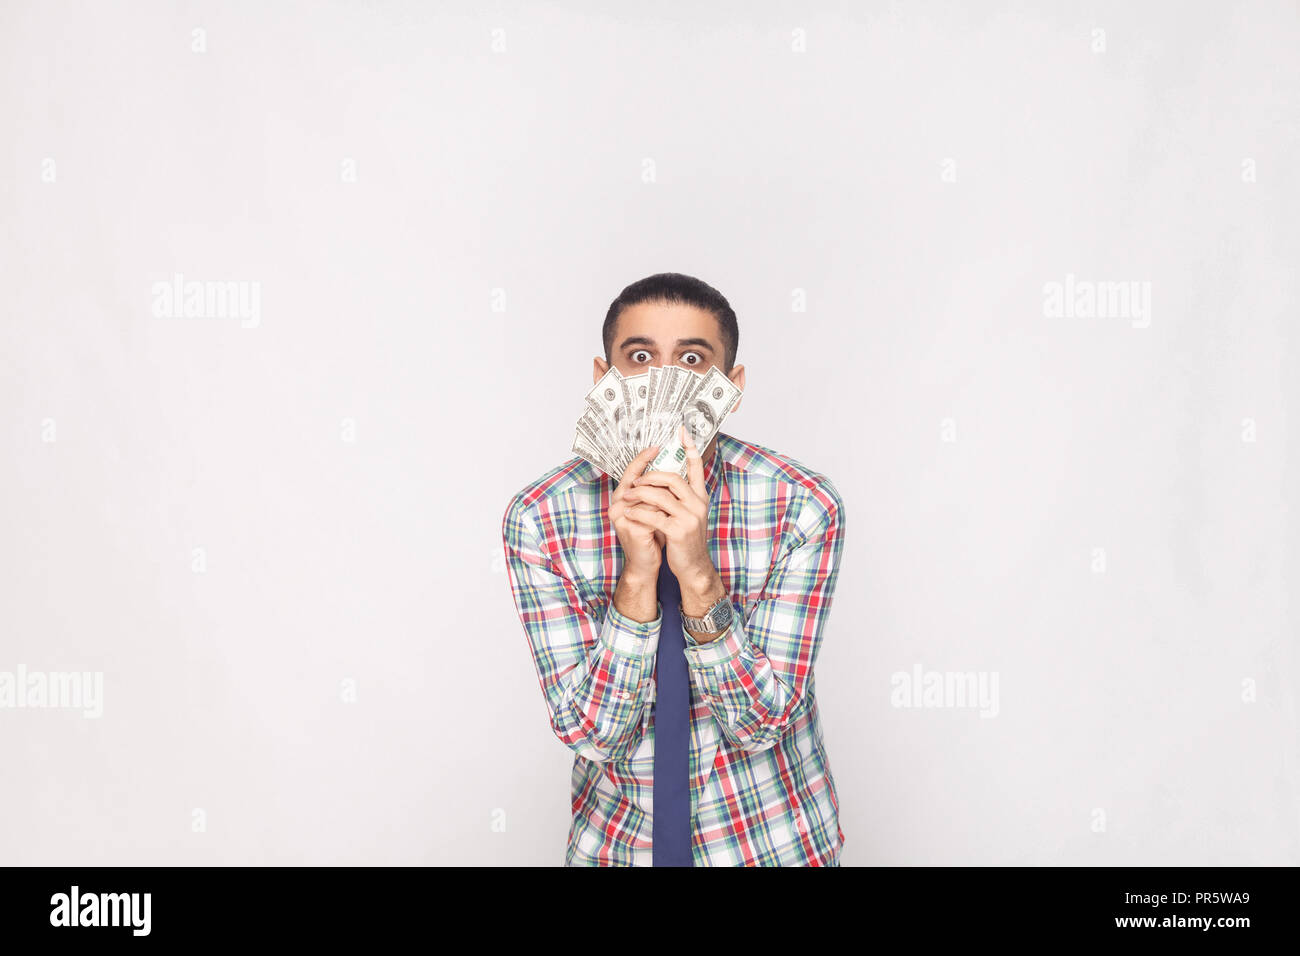 Portrait of rich handsome young adult businessman in colorful checkered shirt with blue tie standing and showing fan of dollars with big crazy eyes. I Stock Photo